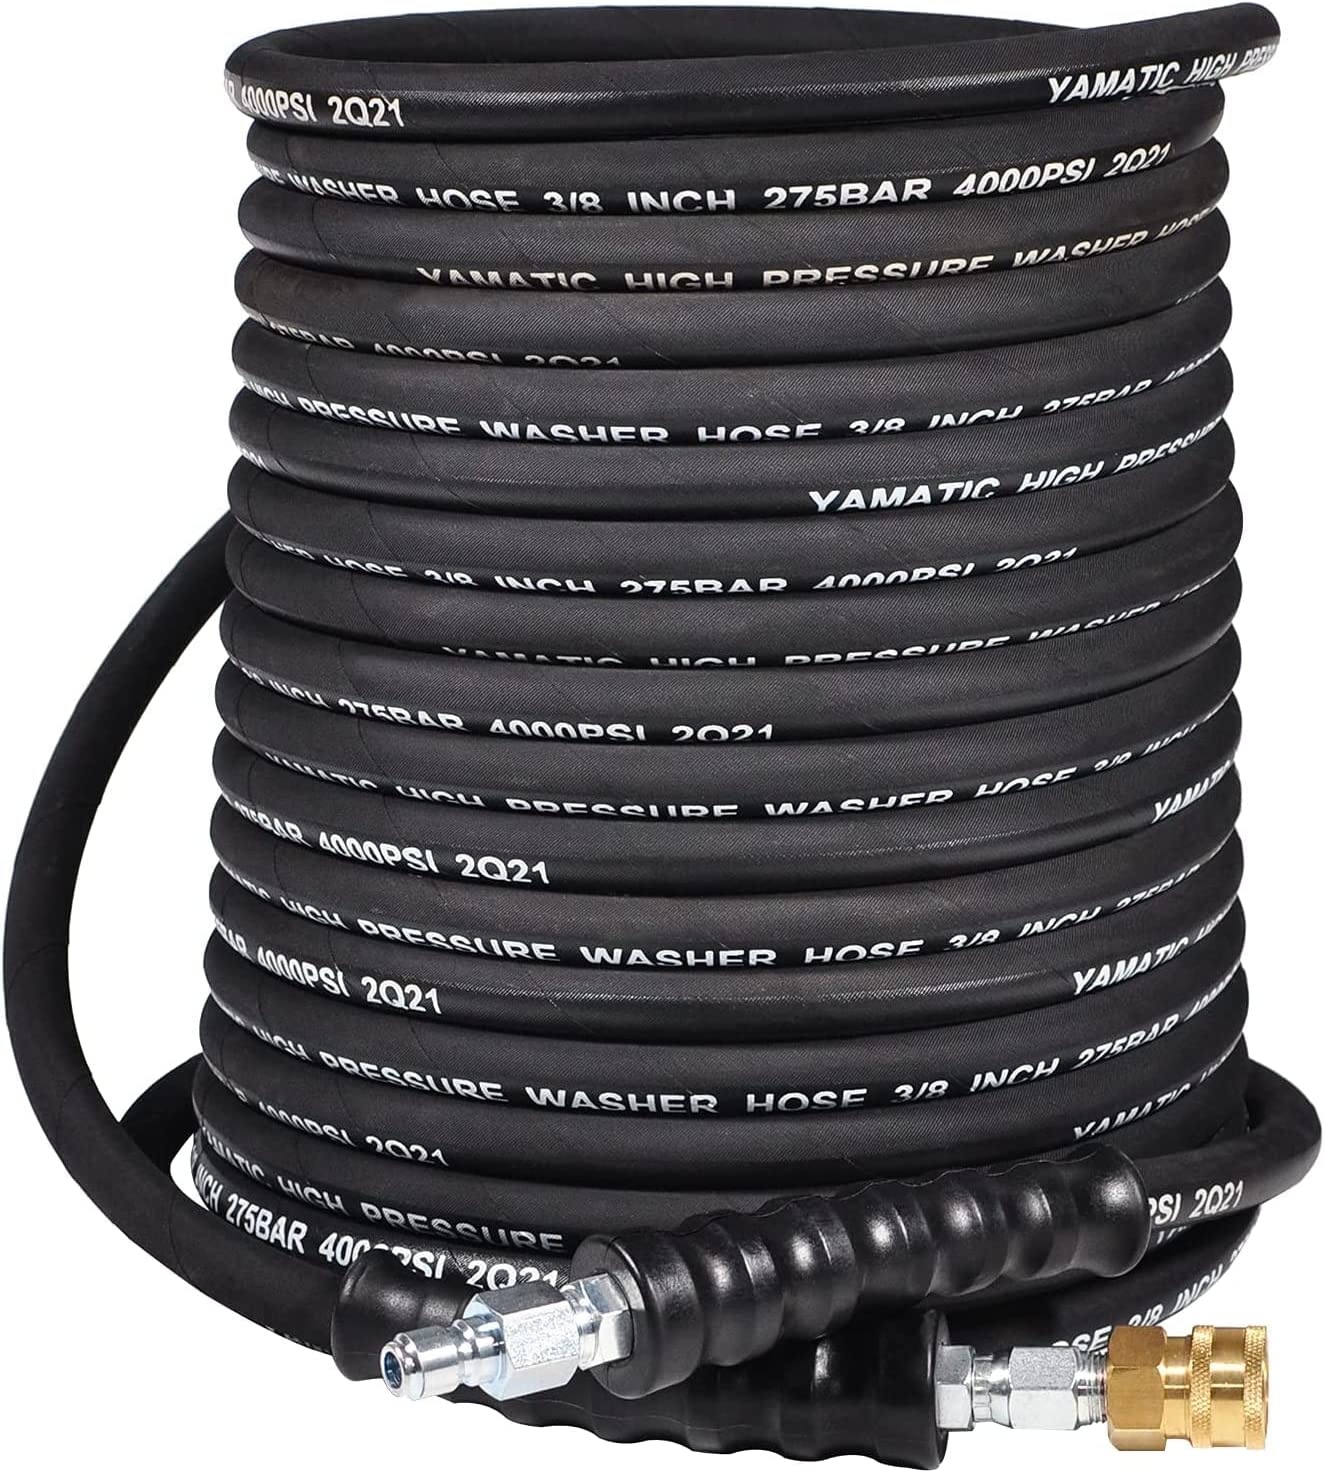 YAMATIC W 3/8" Pressure Washer Hose 4000 PSI 50FT Hot Water Power Washer Hose Max 212??F with Swivel Quick Connect, Commercial Grade Steel Wire Braided